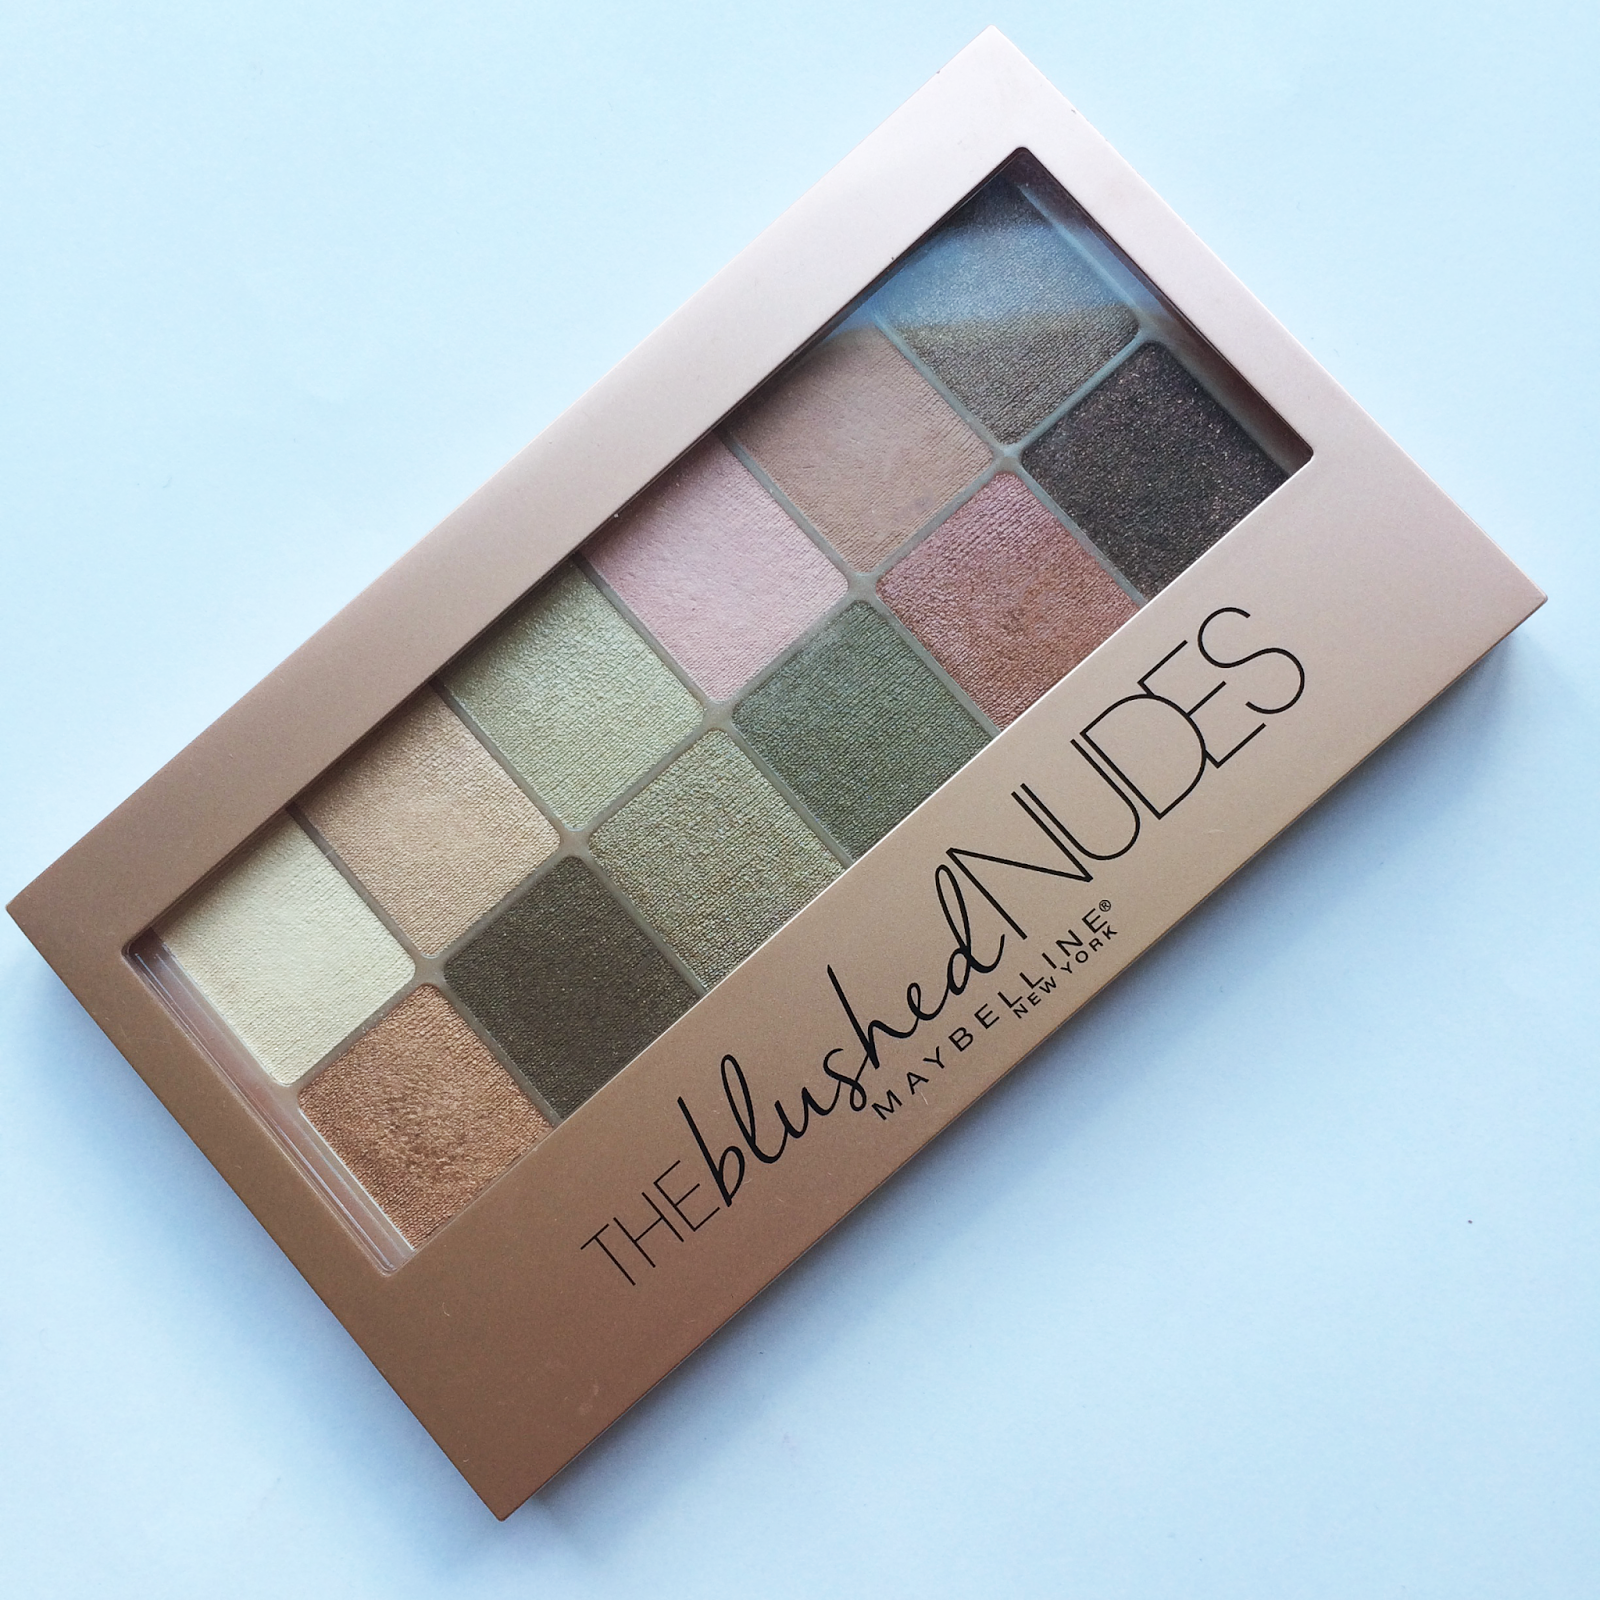 maybelline the blushed nudes eyeshadow palette drugstore blogger makeup cosmetics